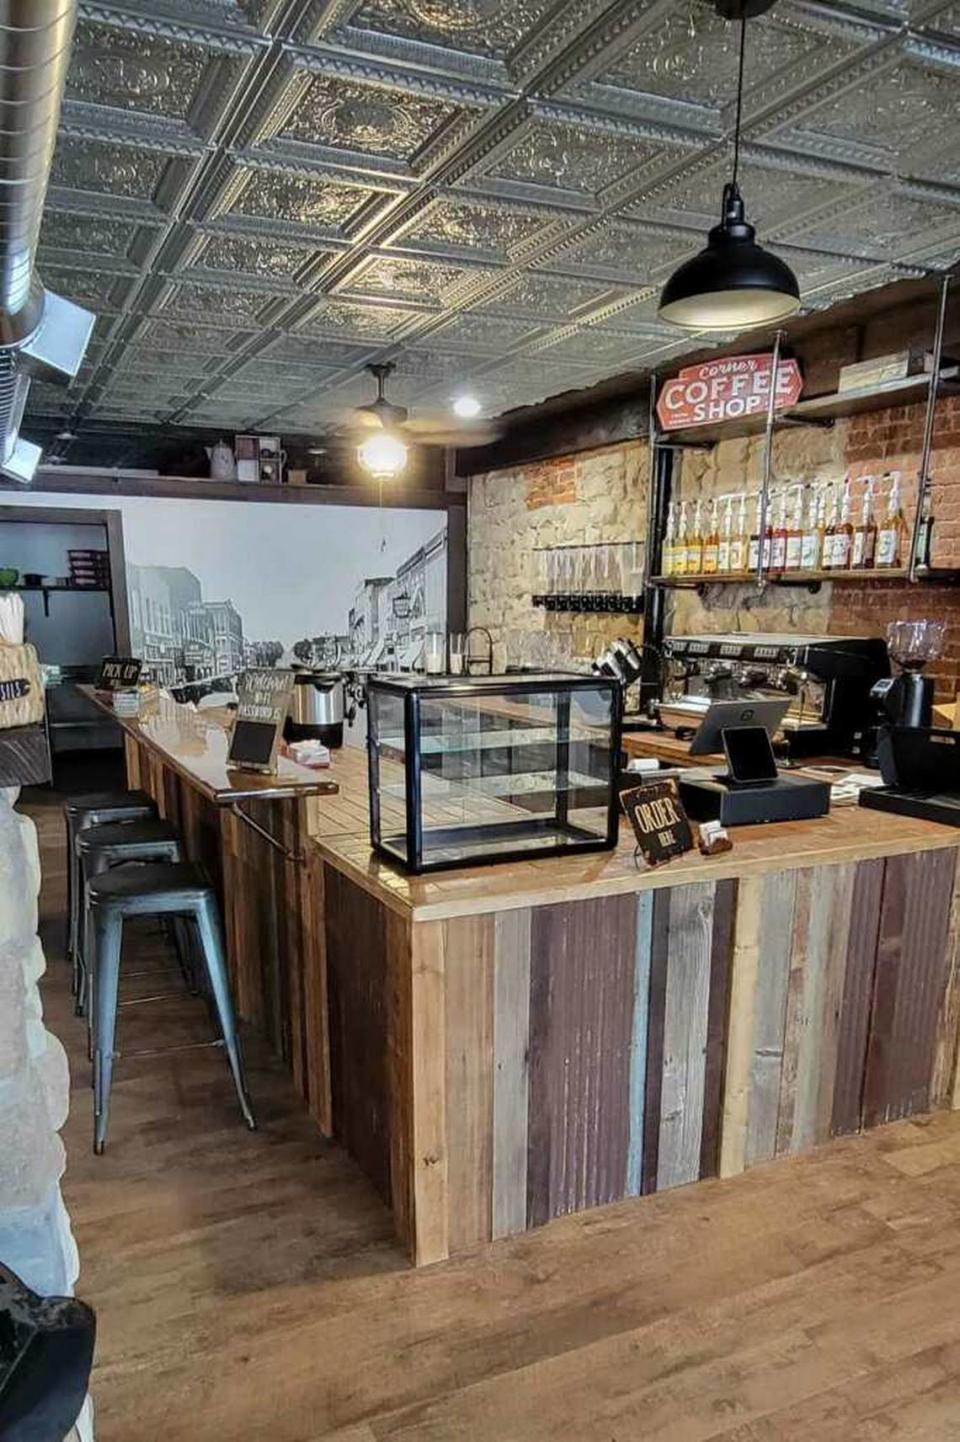 Downtown Augusta will soon be home to a new coffee shop called M&J’s Coffeehouse.